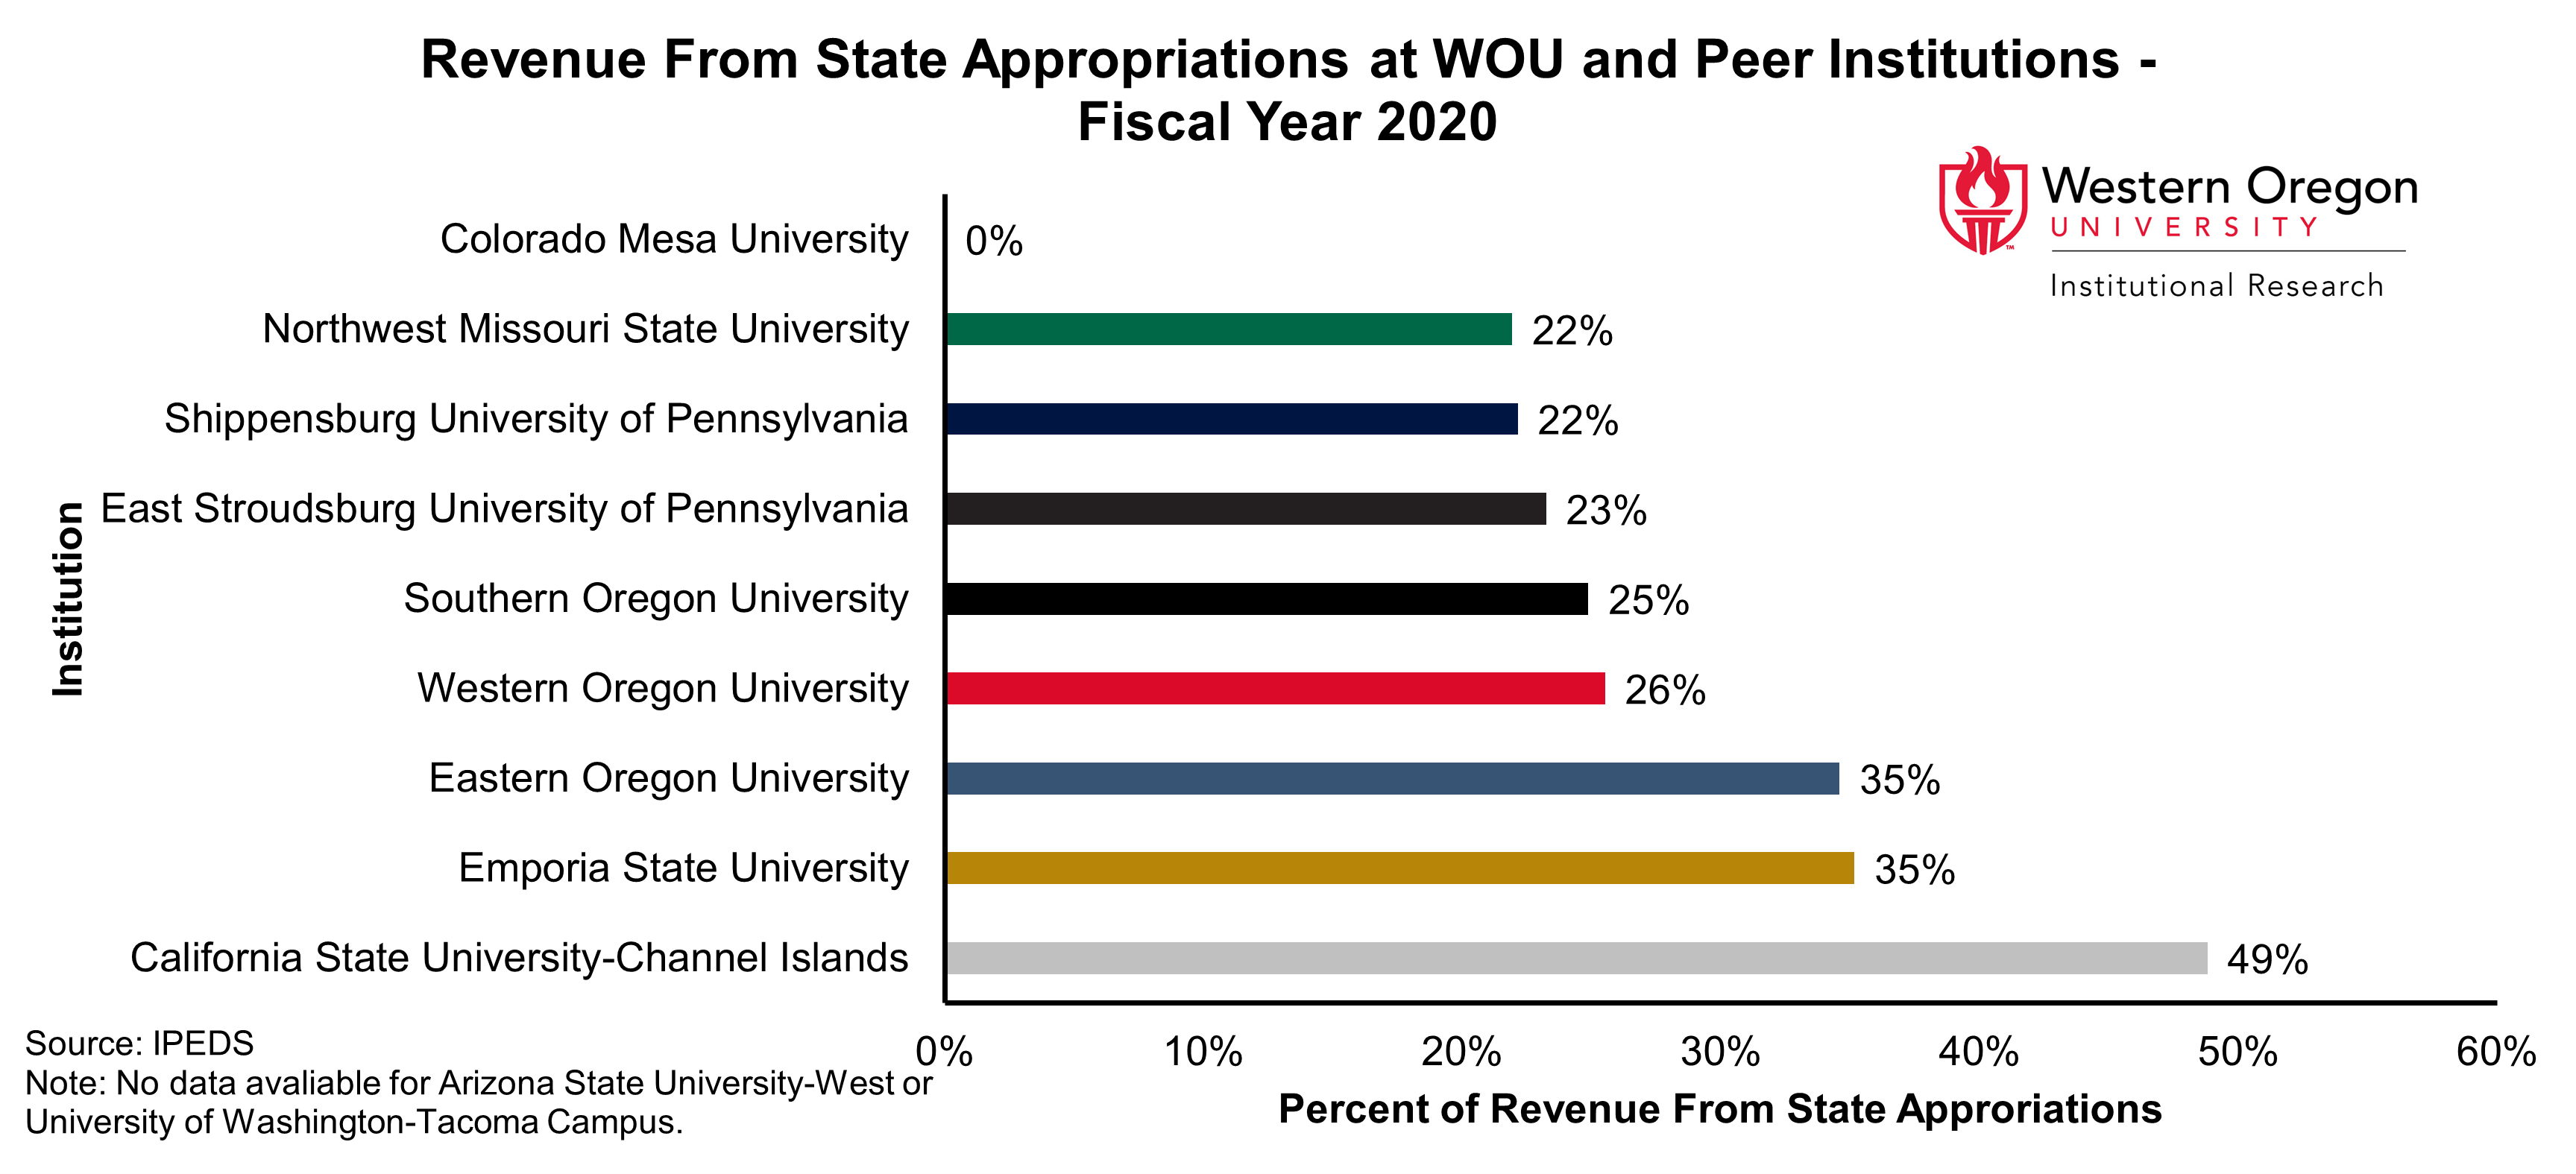 Bar graph of the percentage of revenue from state appropriations for WOU and peer universities in 2020, showing percentages that range from 0% to 49% with WOU's percentage falling a little above the median